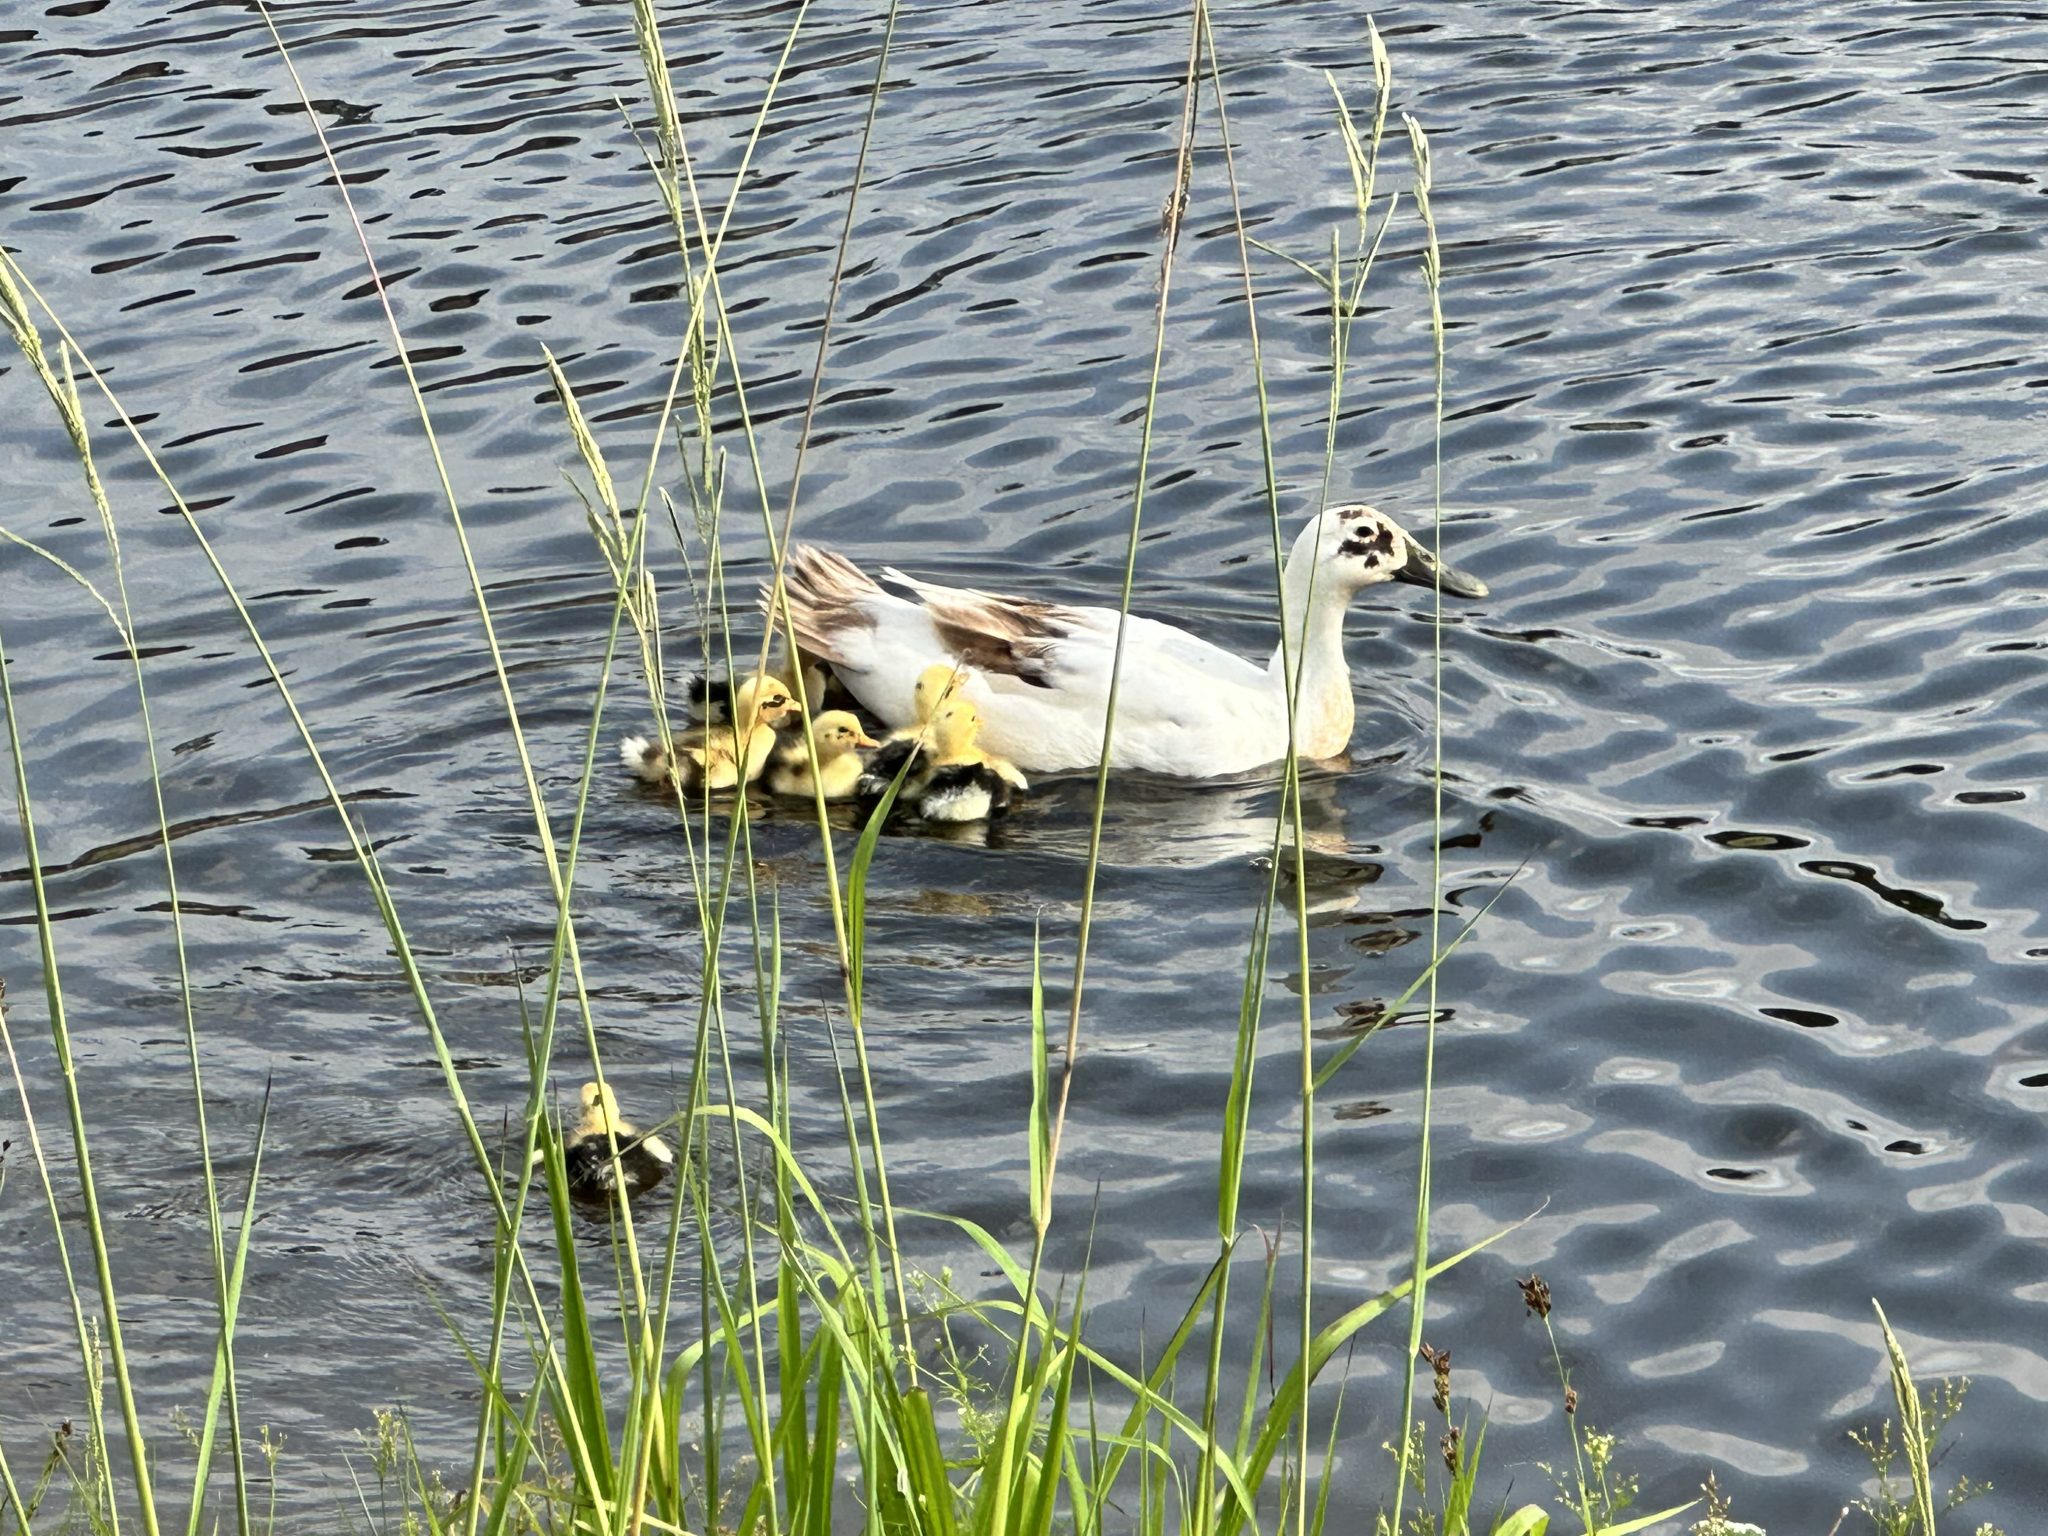 Momma duck with her new baby ducks swimming in a pond with grass reeds in front